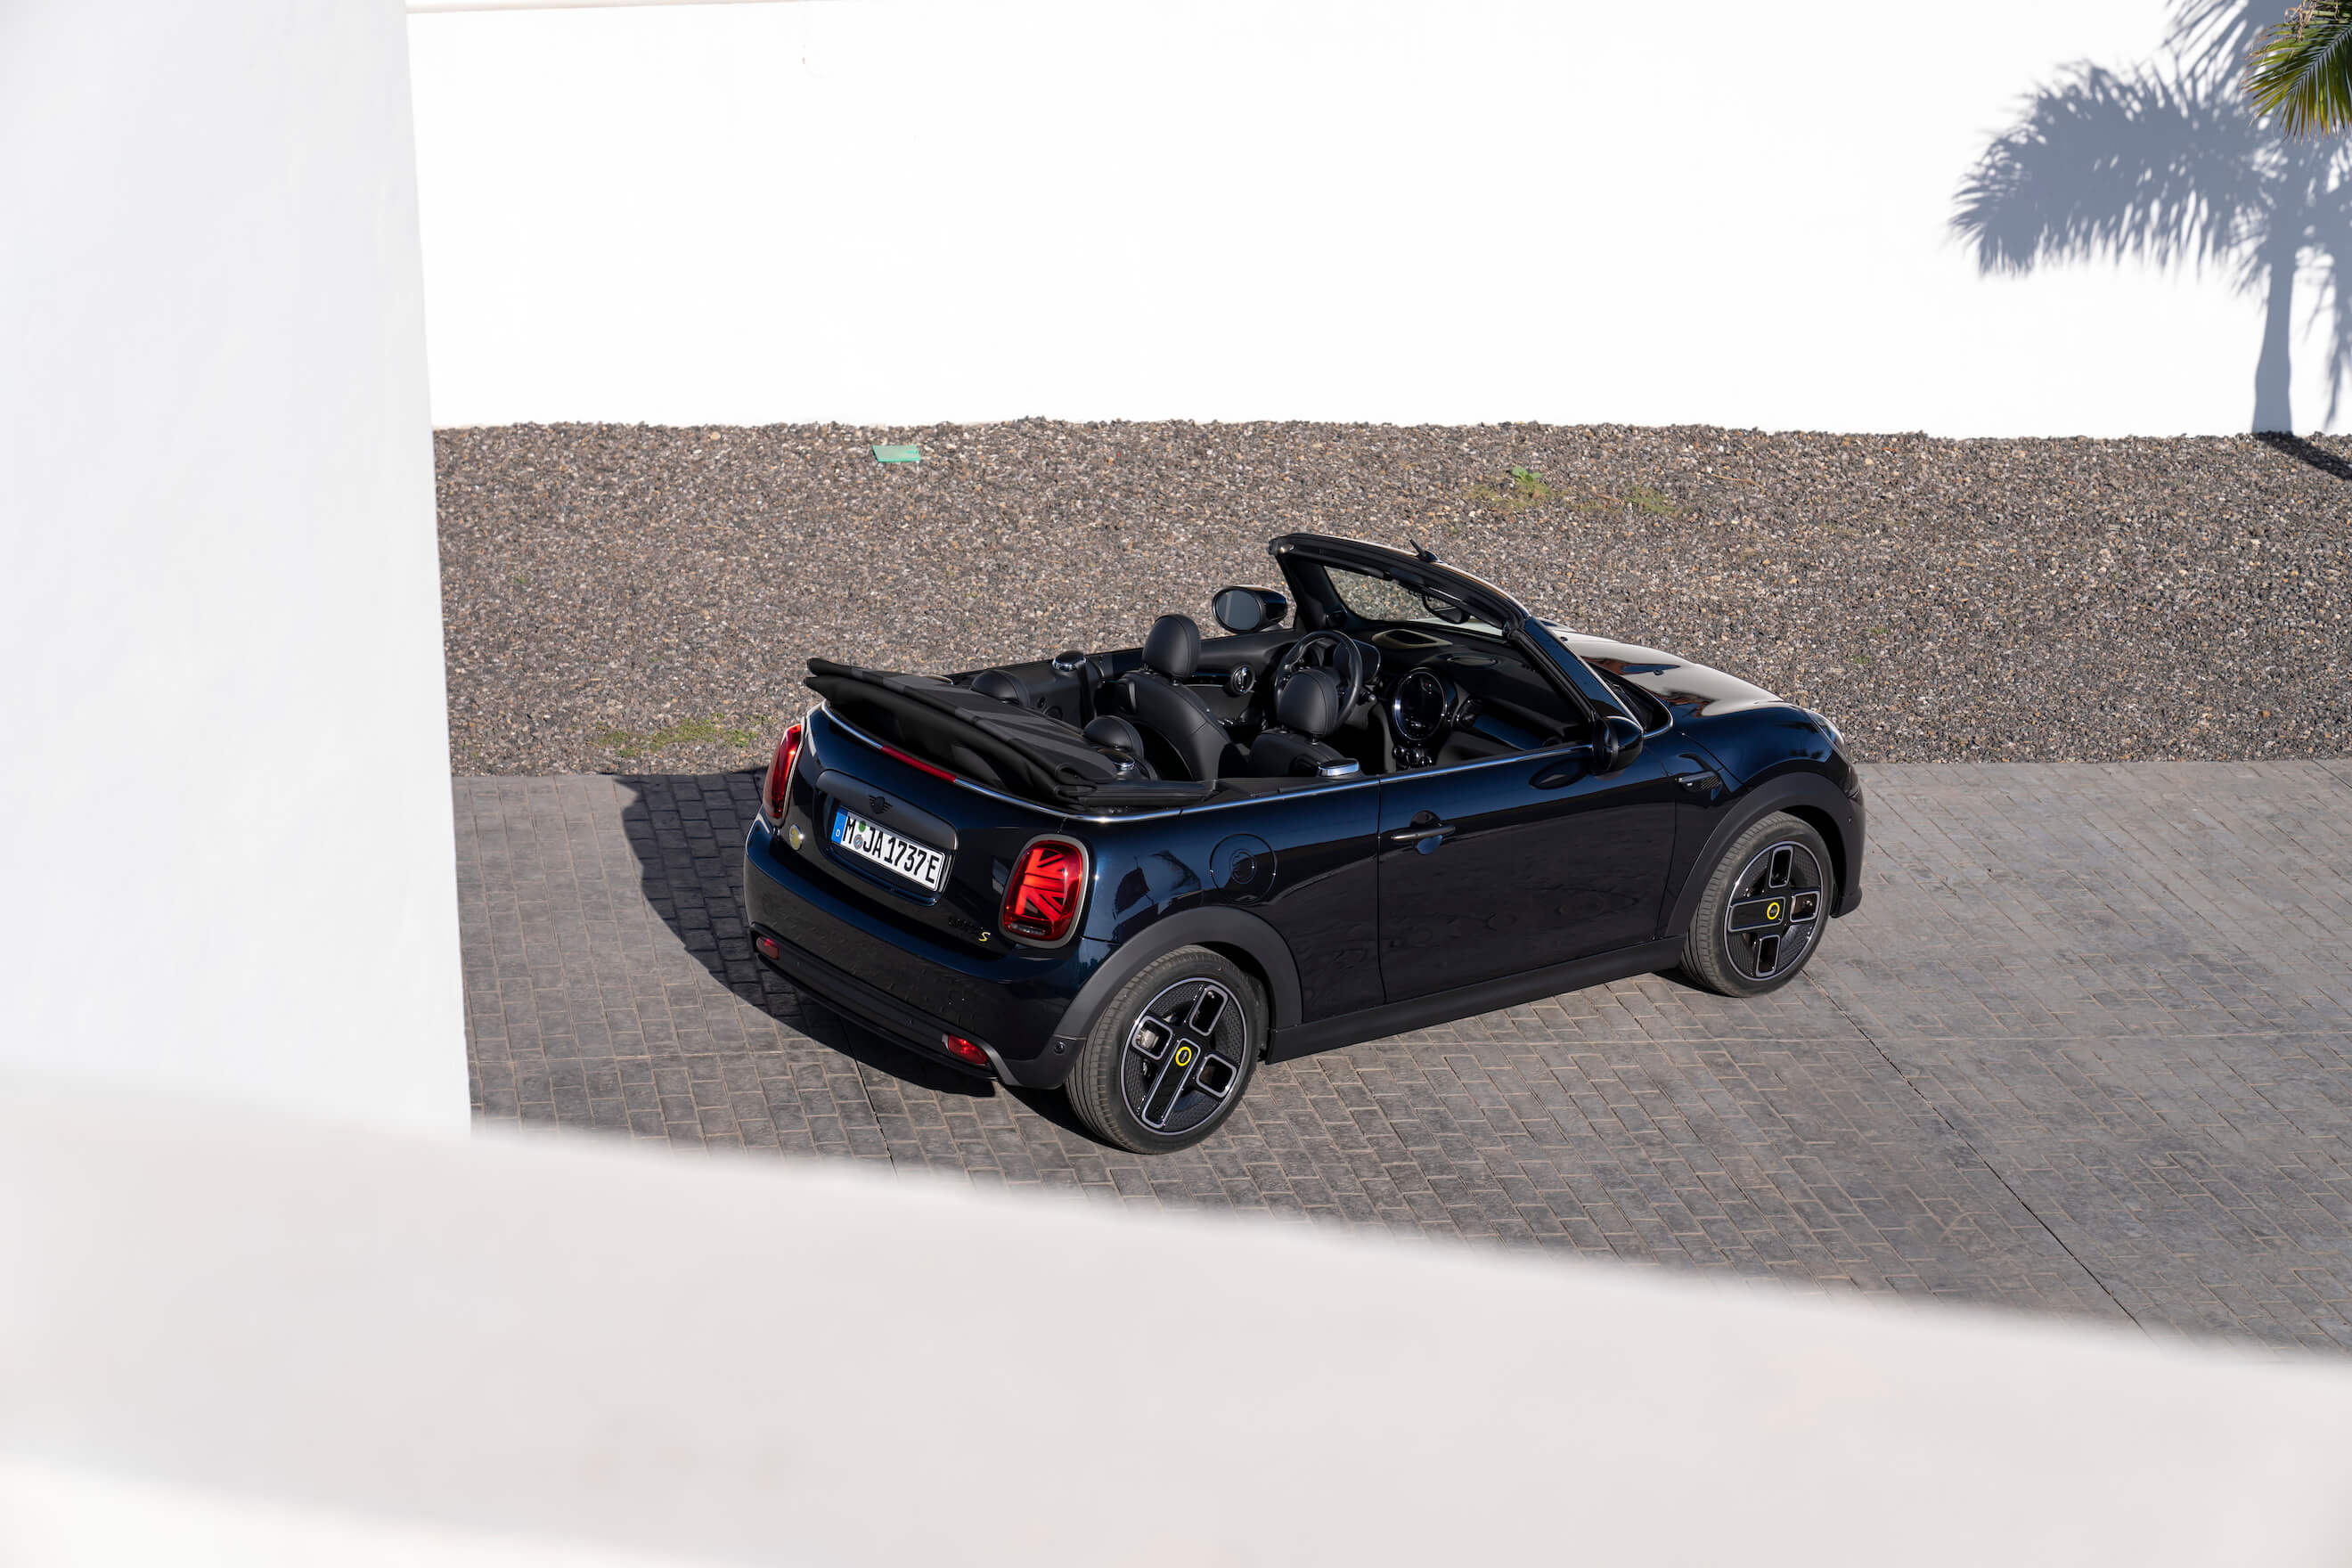 The convertible Mini Cooper Electric from a top-down view.